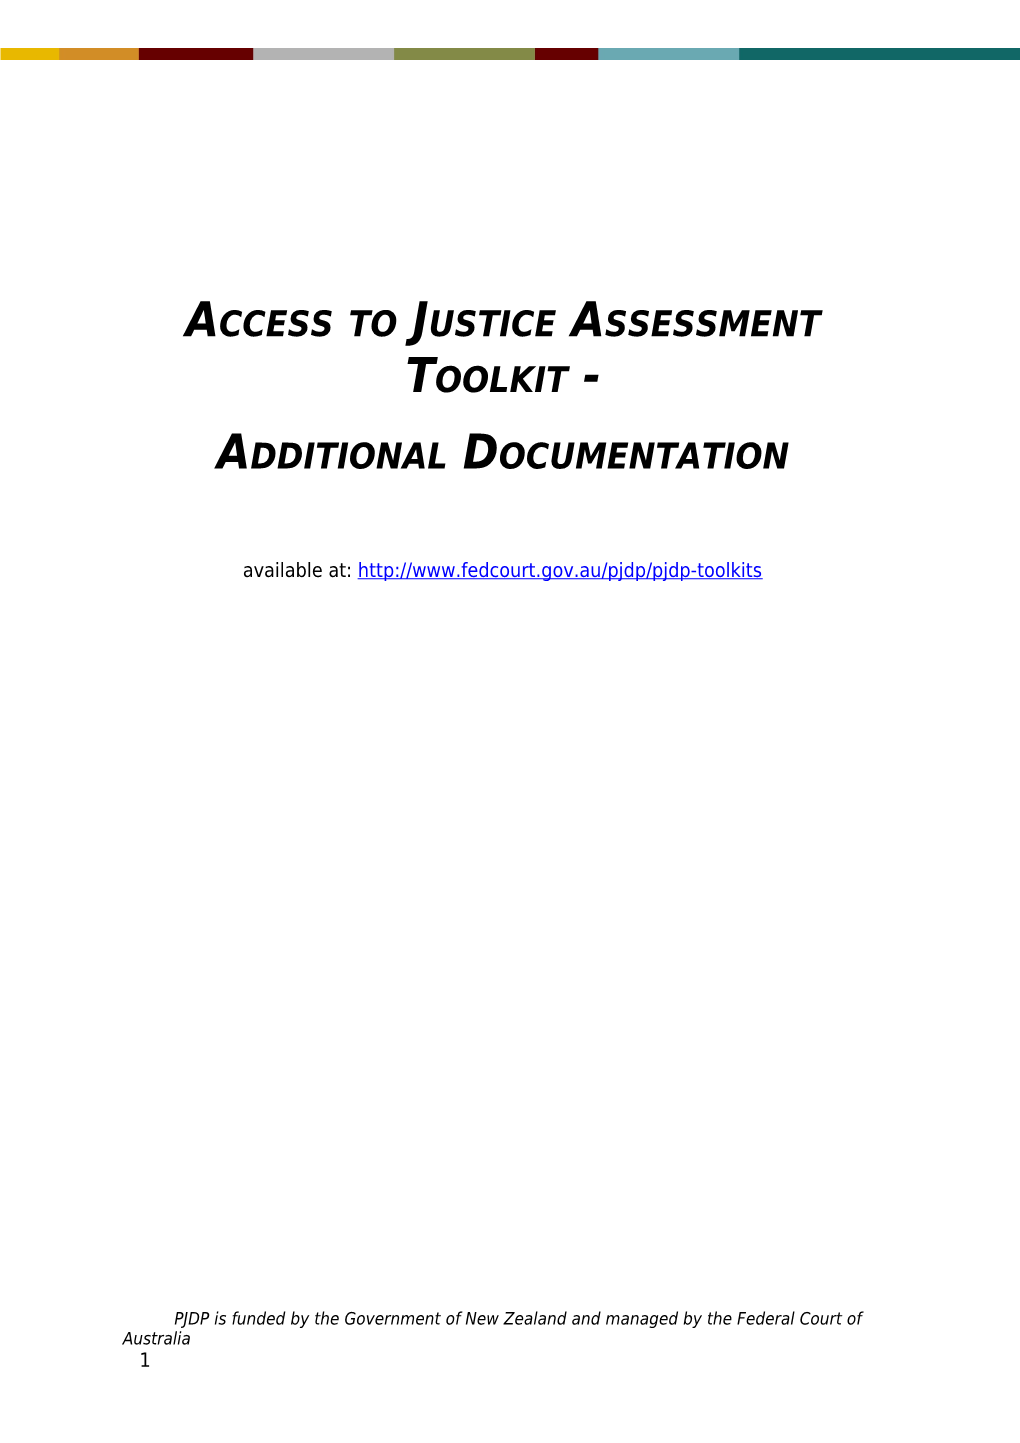 Access to Justice Assessment Toolkit Additional Documentation